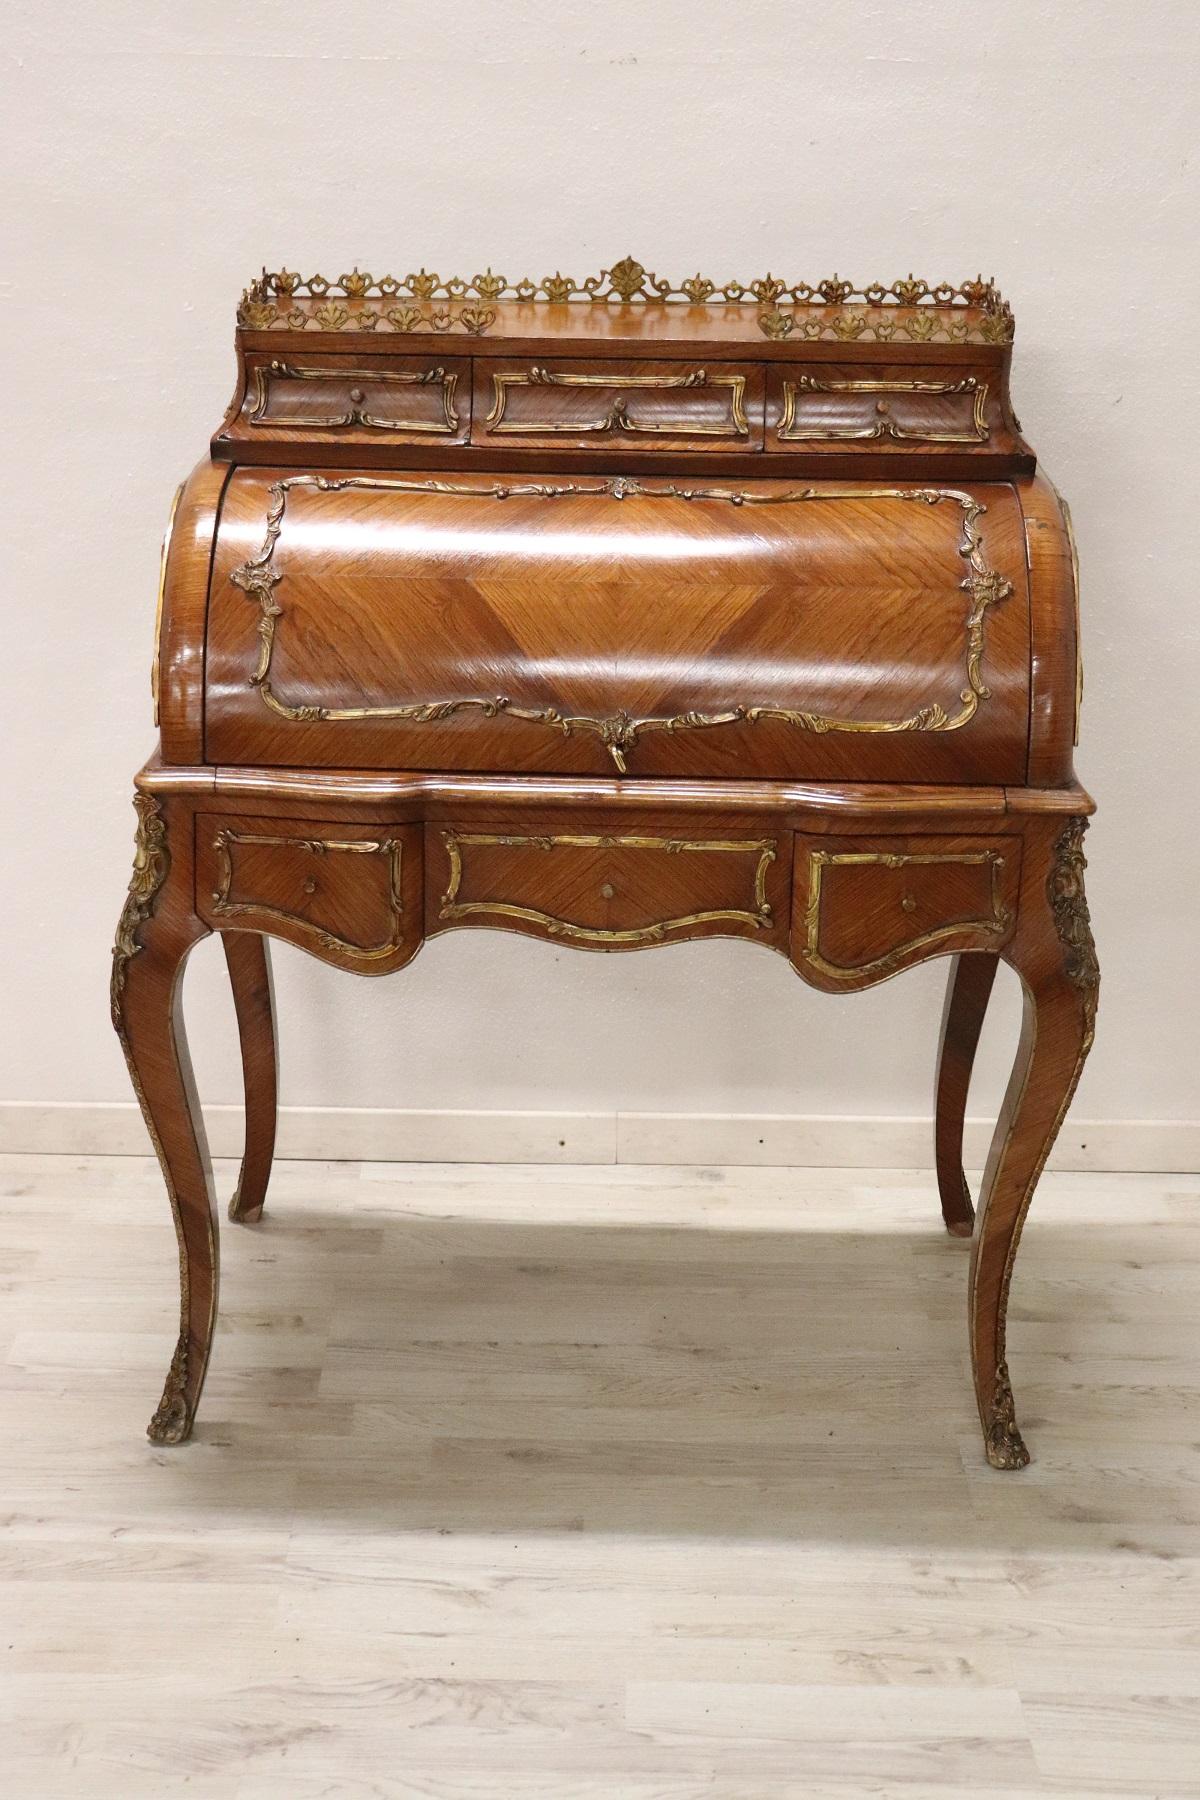 Spectacular antique French desk in precious rosewood. The line is typical of the Louis XV style with elegant wavy legs. Rich decoration in finely chiseled gilded bronze makes this desk even brighter. The front with rounded shutter when it is opened